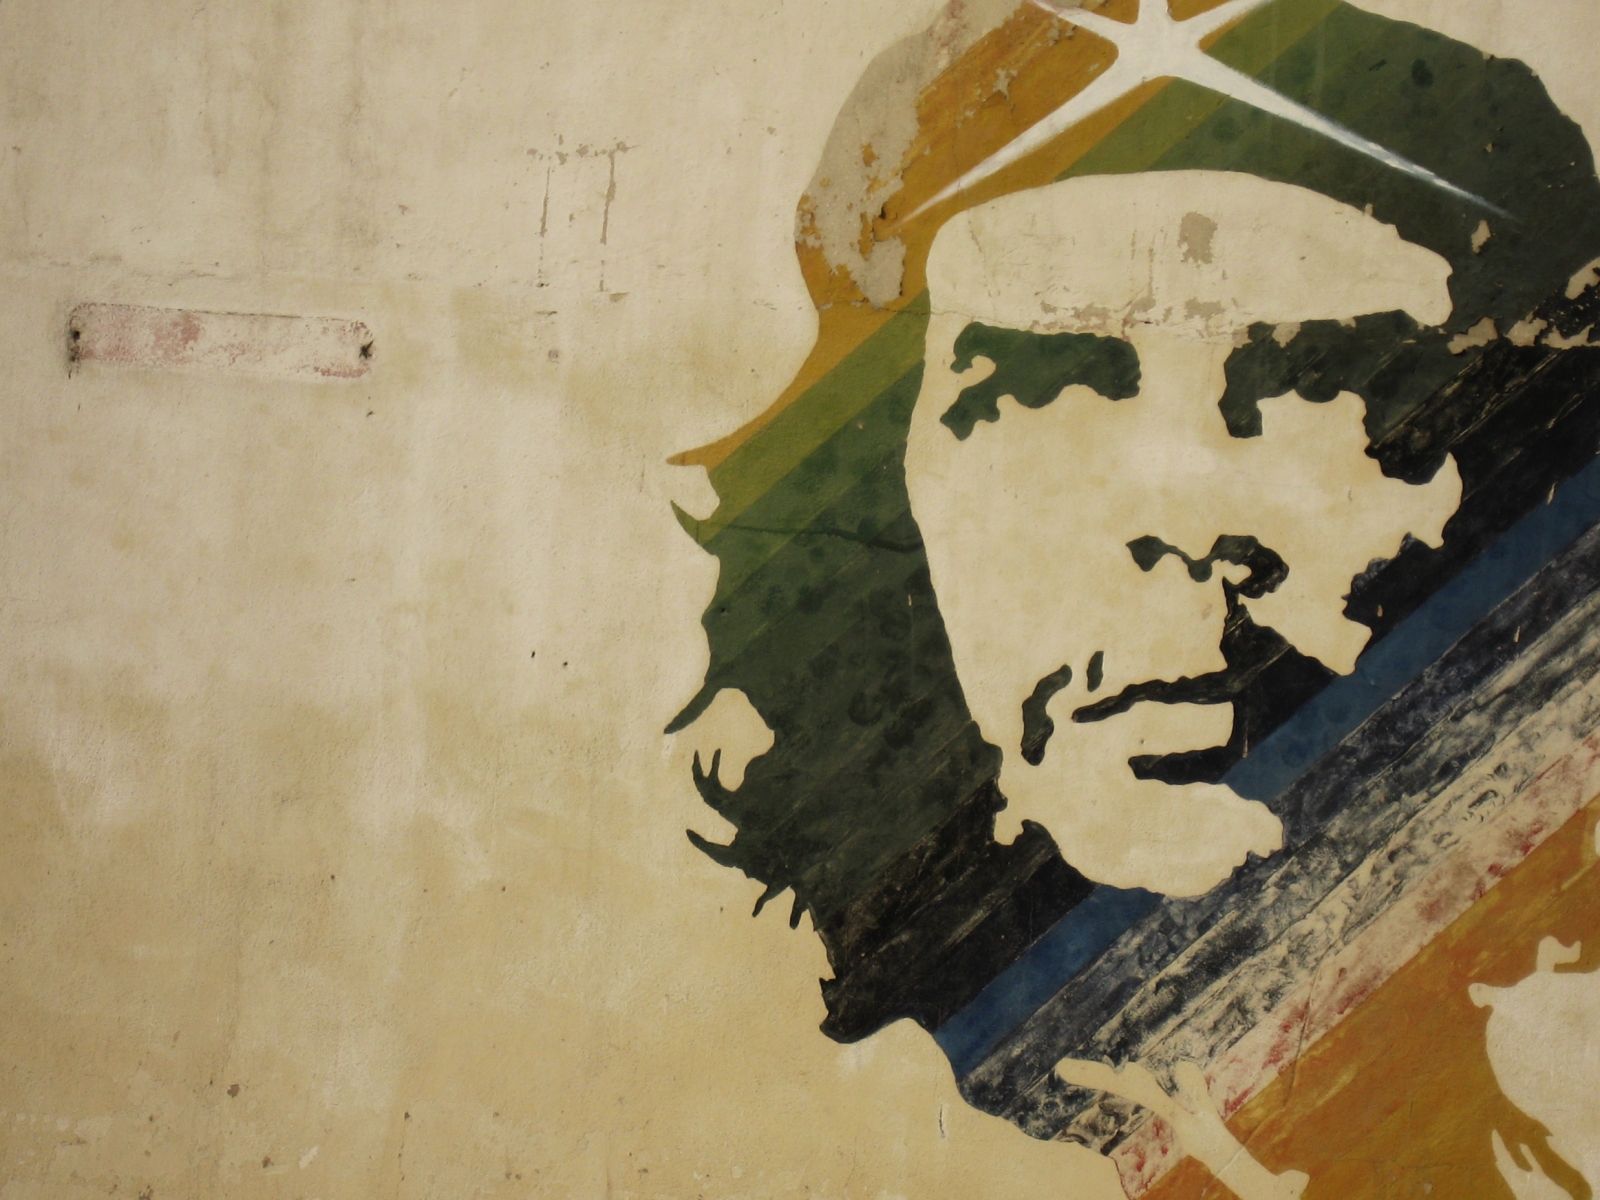 Download Che Guevara Wallpaper Hd Iphone PNG Image with No Background   PNGkeycom